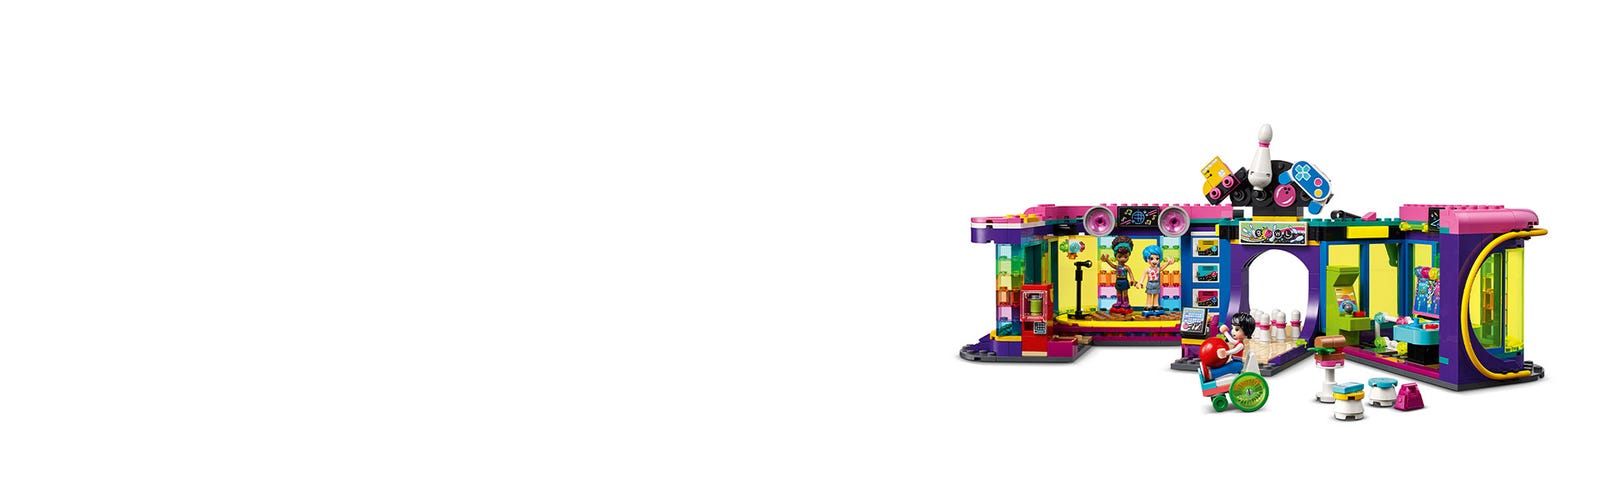 Roller Disco Arcade 41708 | Buy the online Shop | LEGO® Friends Official at US